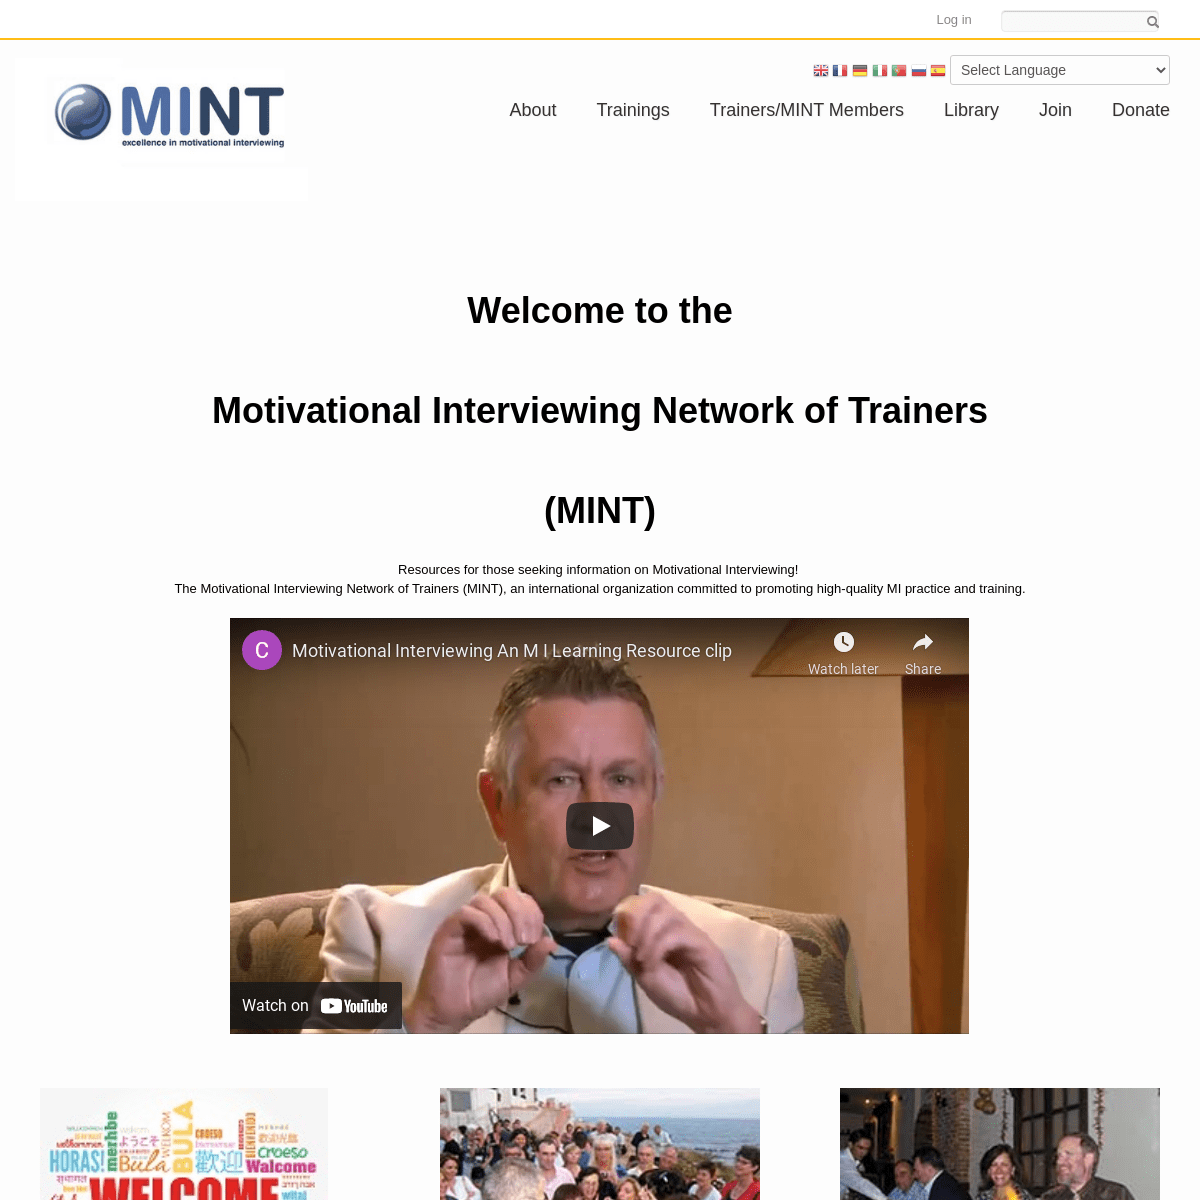 Welcome to the Motivational Interviewing Website! - Motivational Interviewing Network of Trainers (MINT)